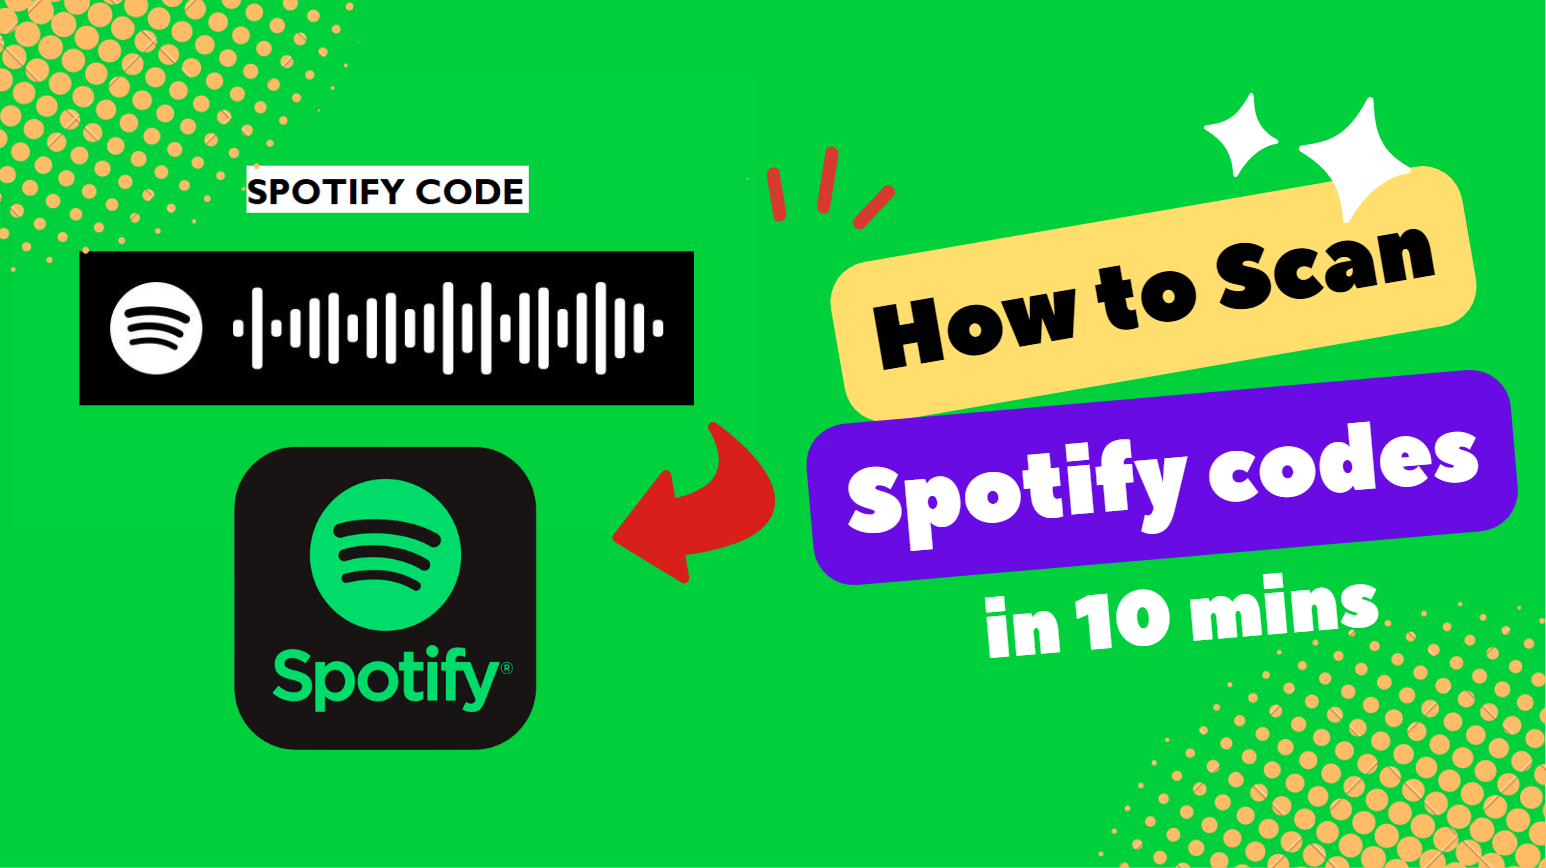 How to Scan Spotify codes on iphone